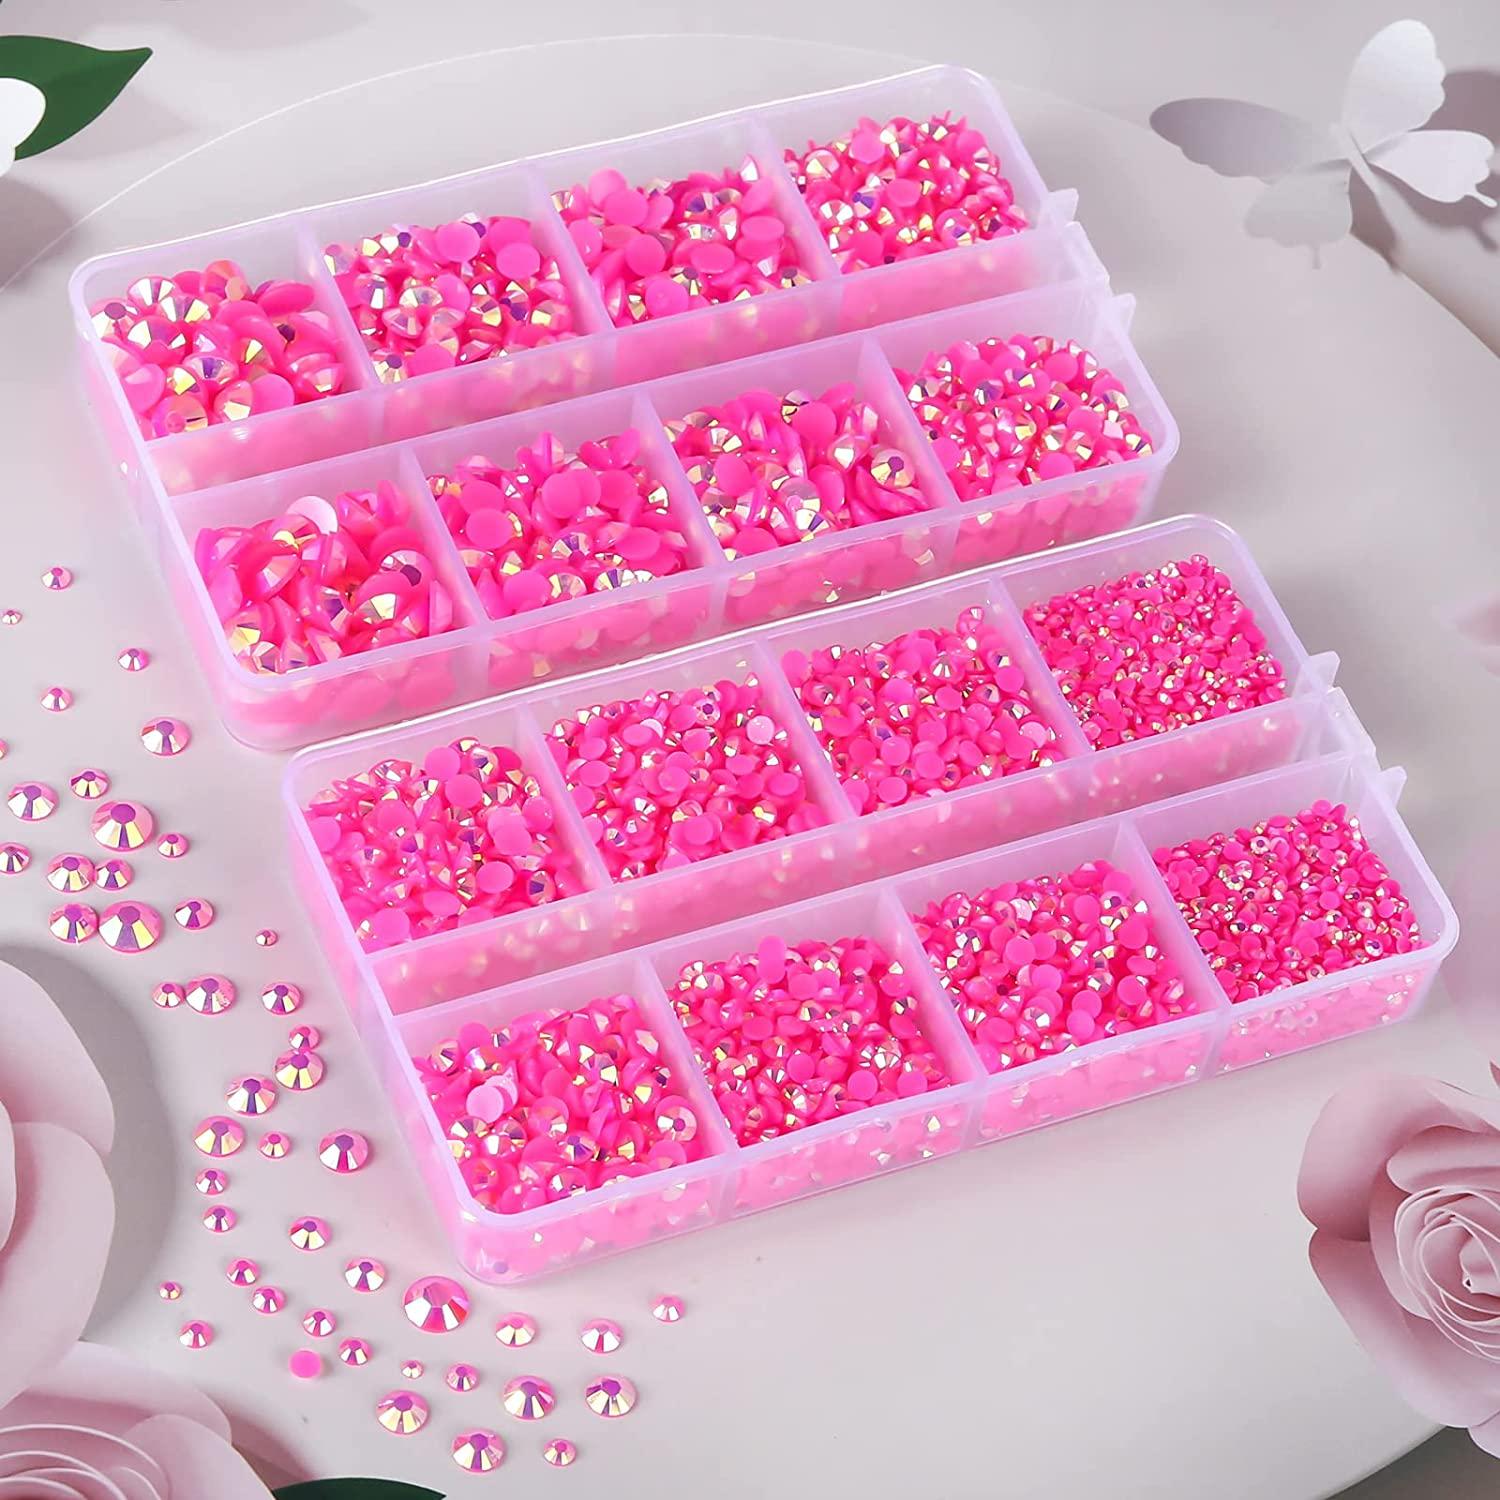 10400PCS Hot Pink Rhinestones, Jelly Resin Rhinestones for Nails, Flatback  Non Hotfix Crystals DIY Rhinestones for Crafts with 15 cm Pencil Sharpener  and Tweezer & Picker Pen (Rose AB)